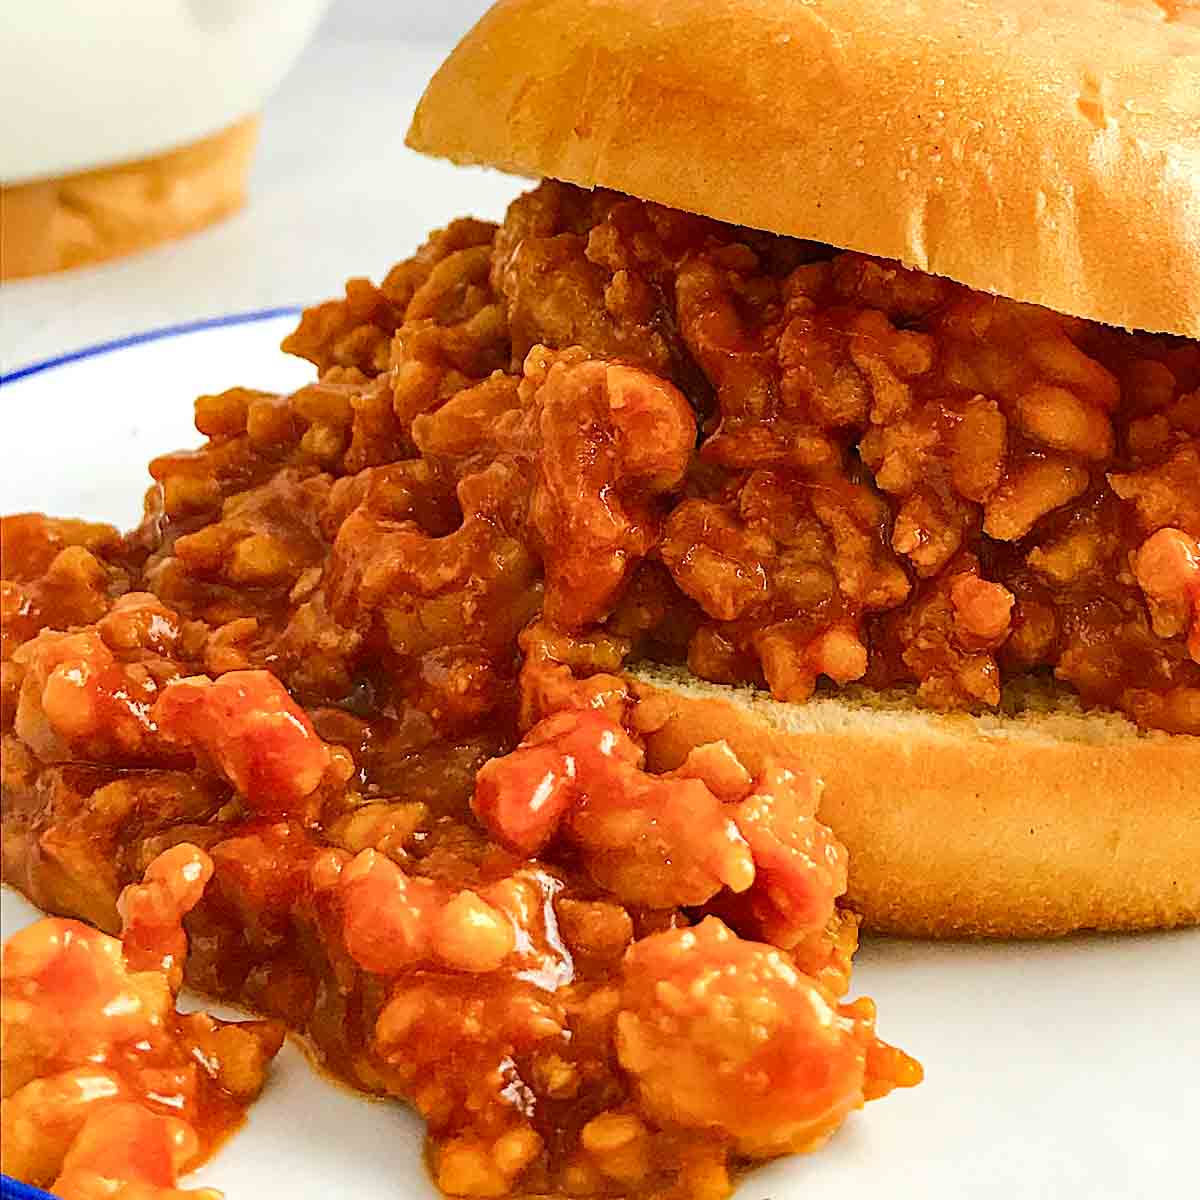 easy sloppy joe recipe (3 ingredients only) - let’s cook chicken!